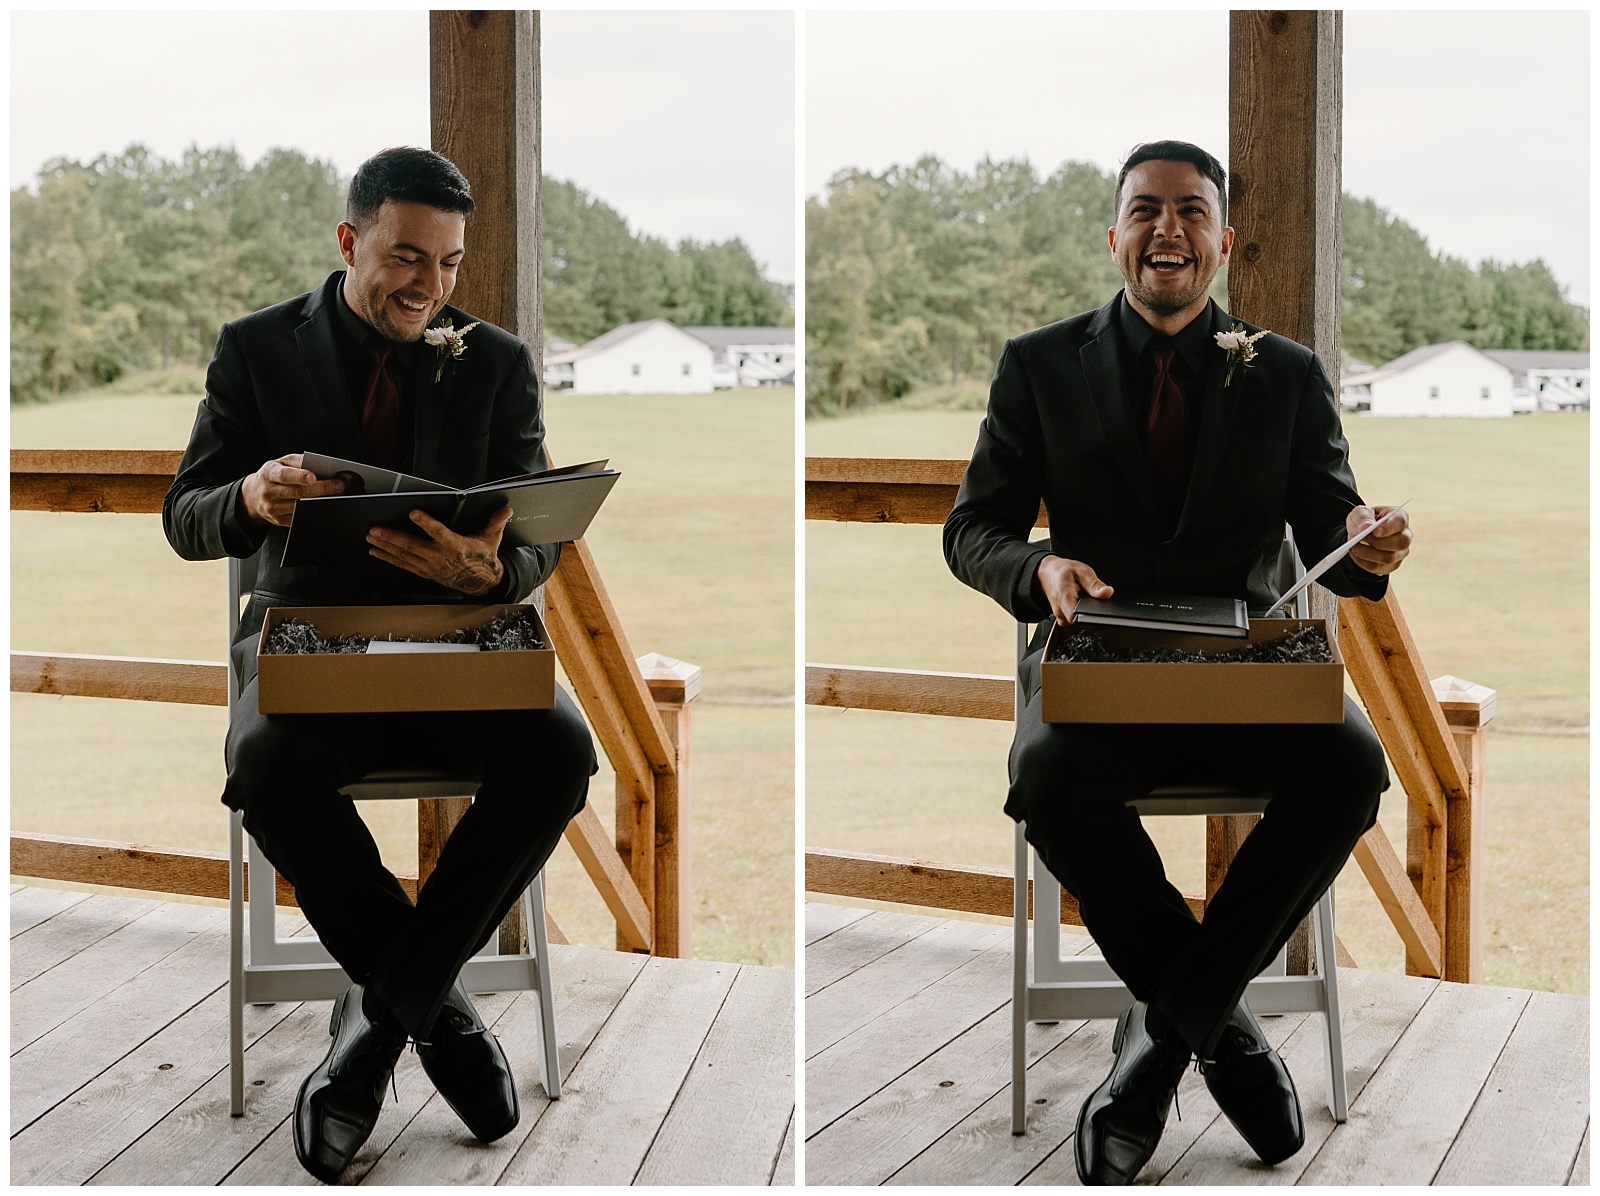 A groom opens a special gift from his bride on their wedding day, which contains an album with images that make him smile and laugh as he opens them.